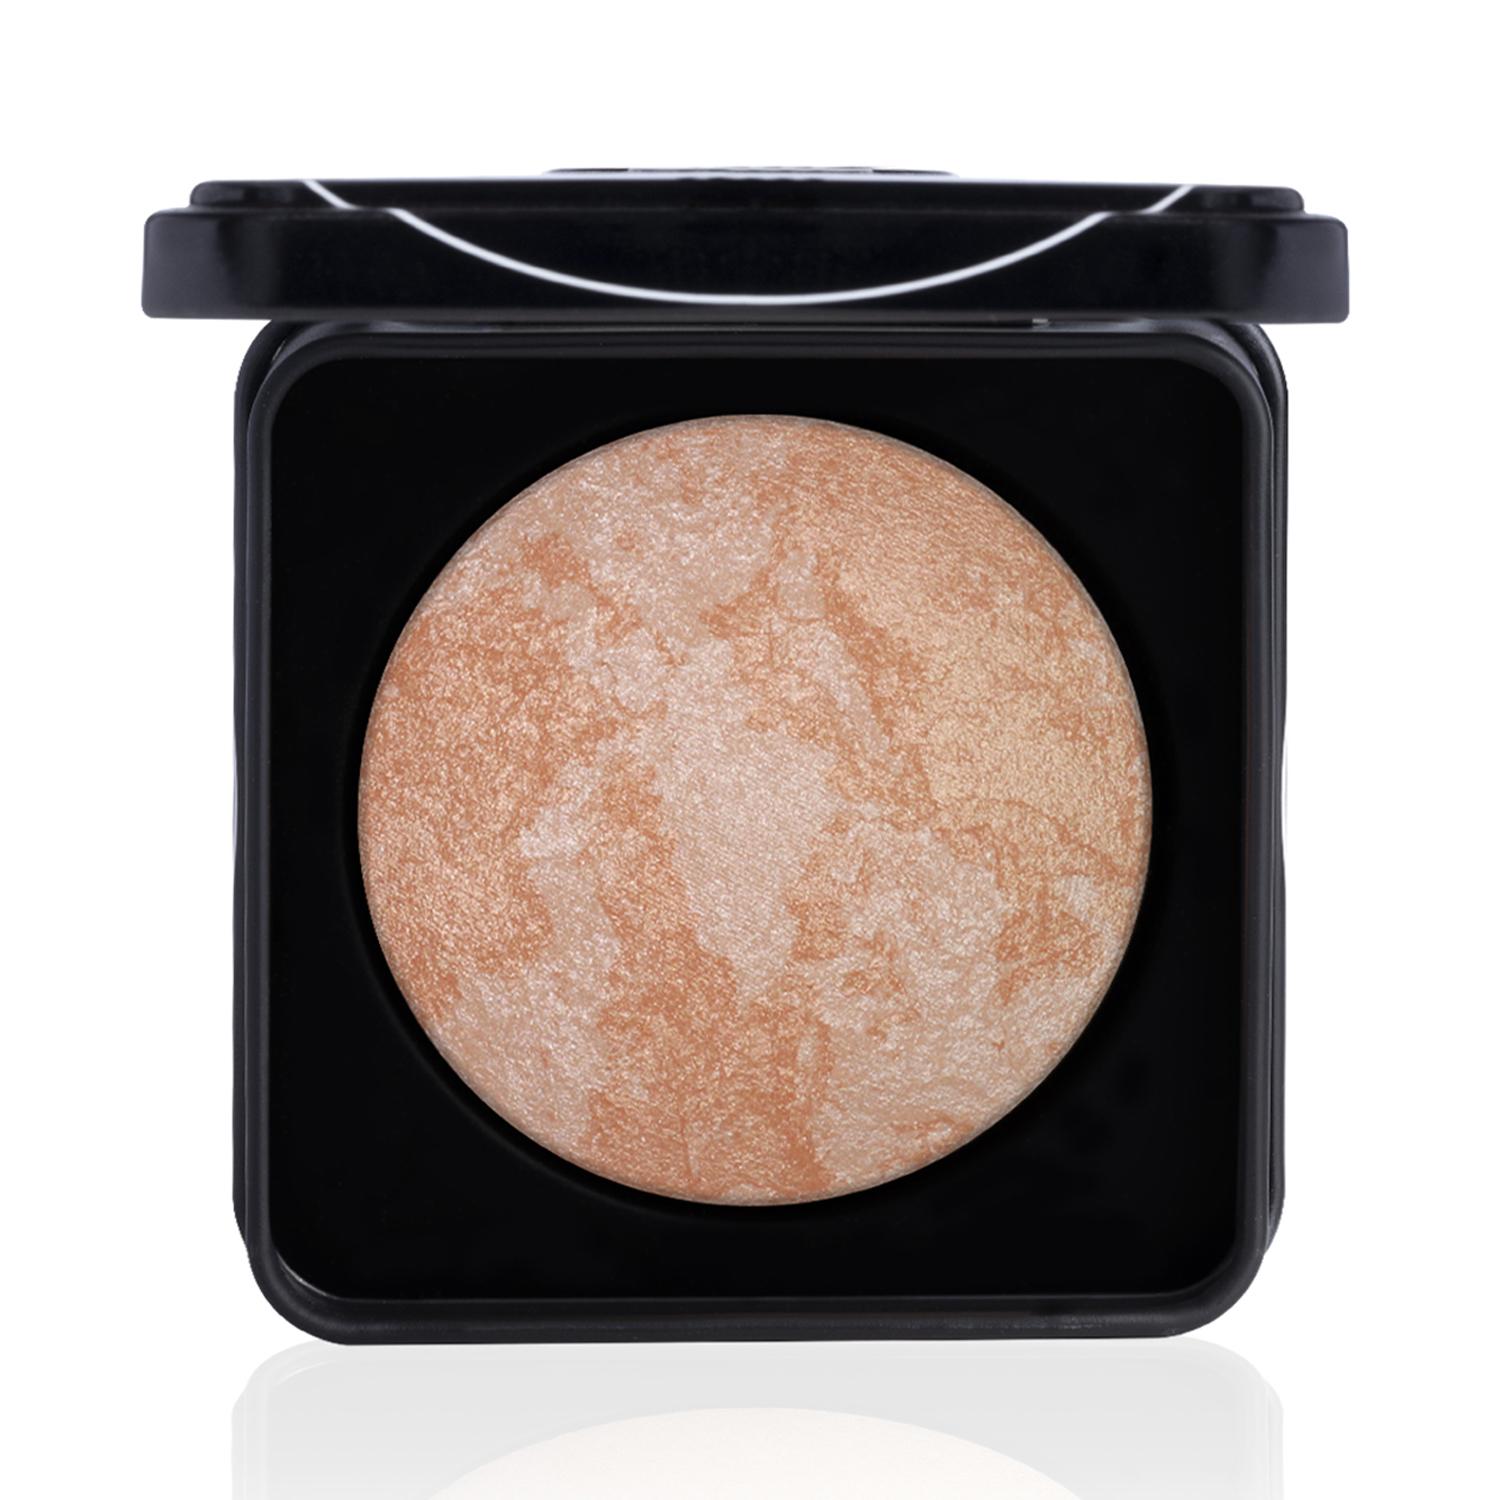 PAC | PAC Baked Highlighter - 02 Iconic (7.5g)